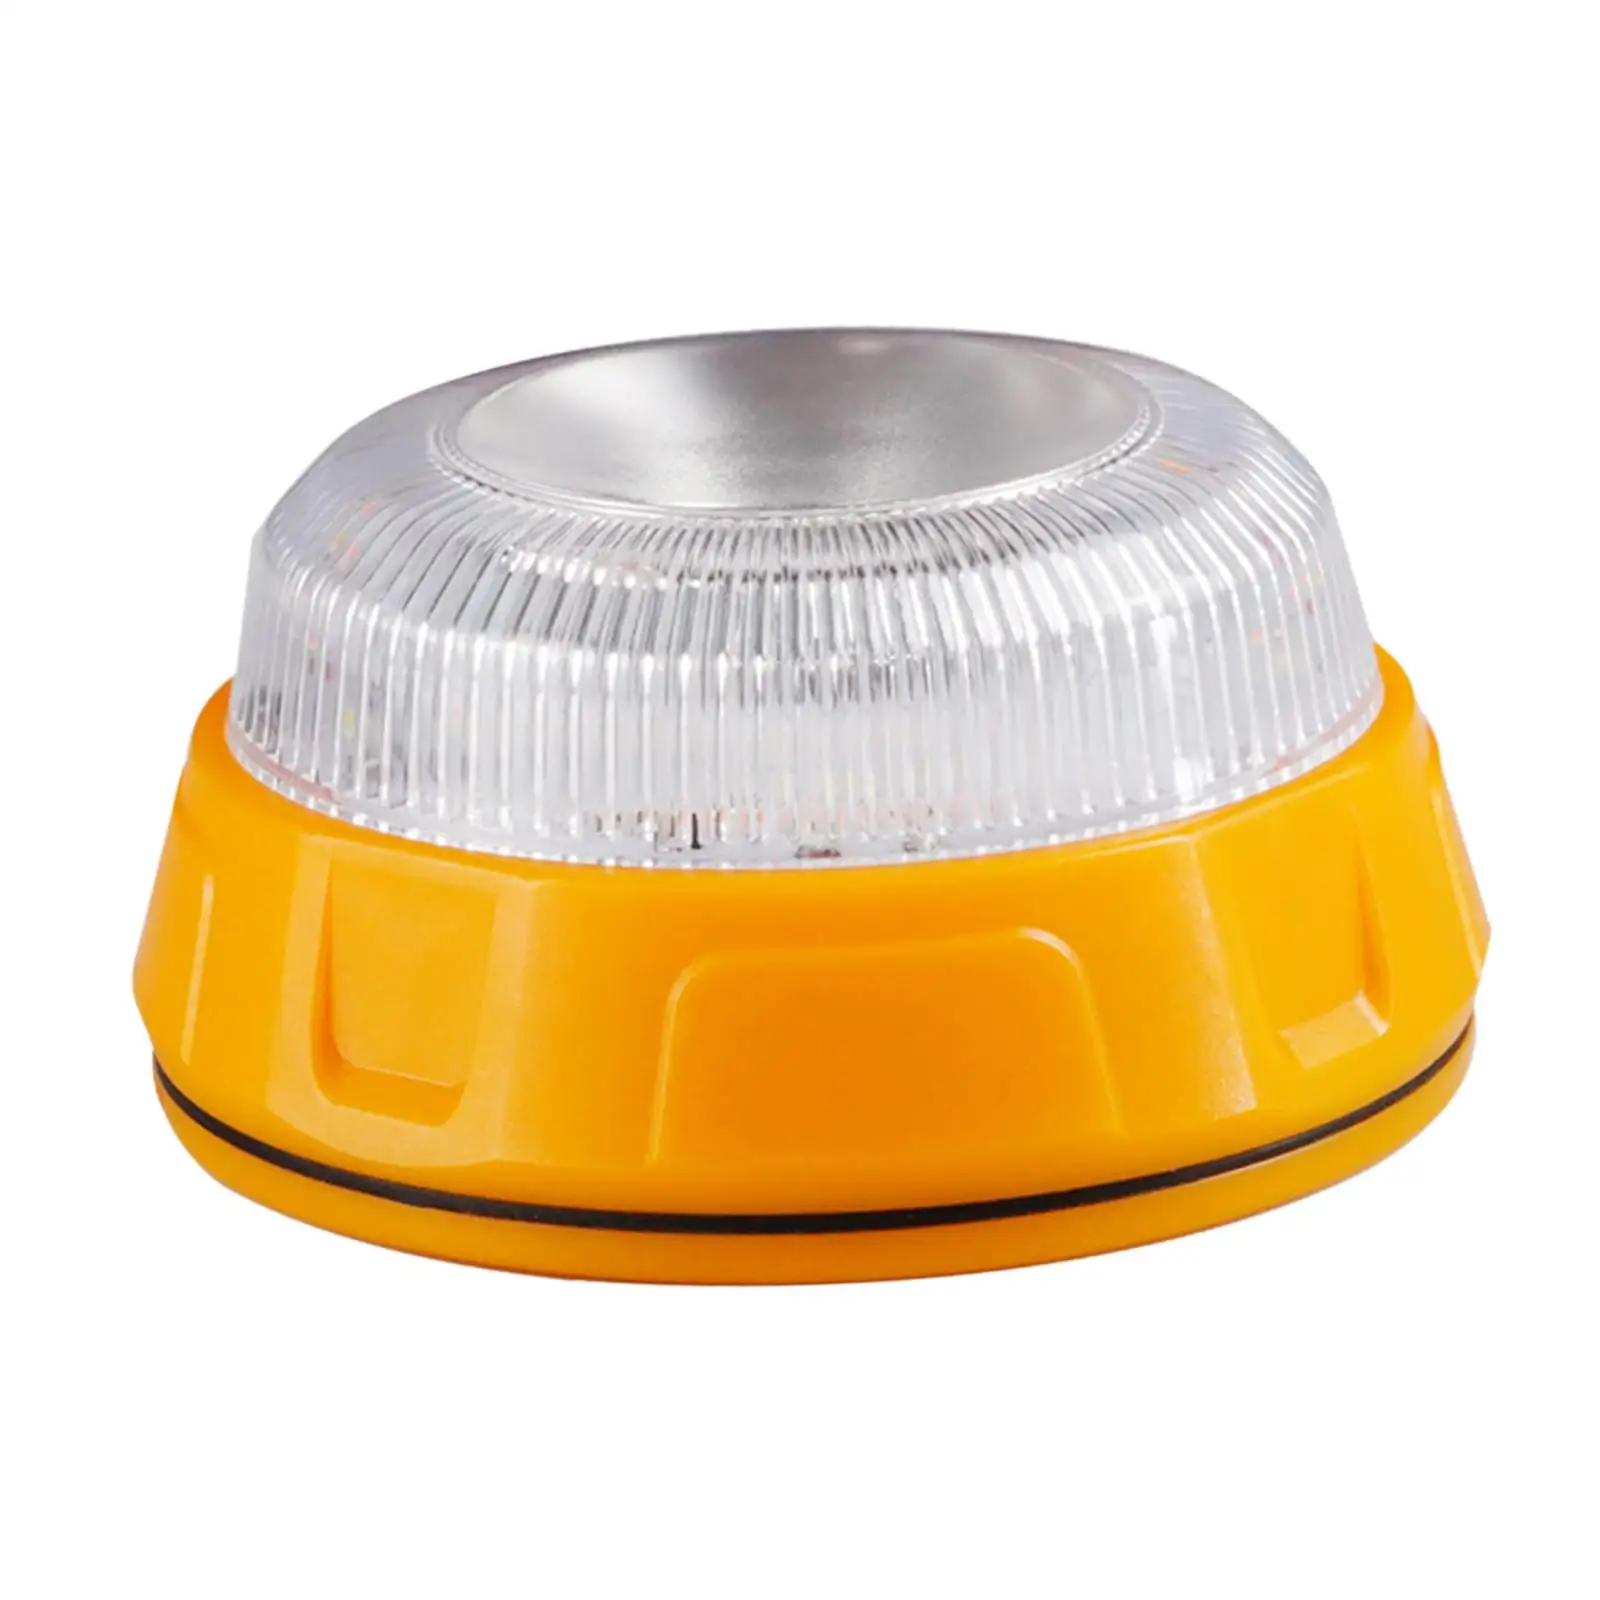 Traffic Warning Lights Waterproof Rechargeable Lights with Magnetic Base Flashing Lamp Emergency Lighting for Marine Car